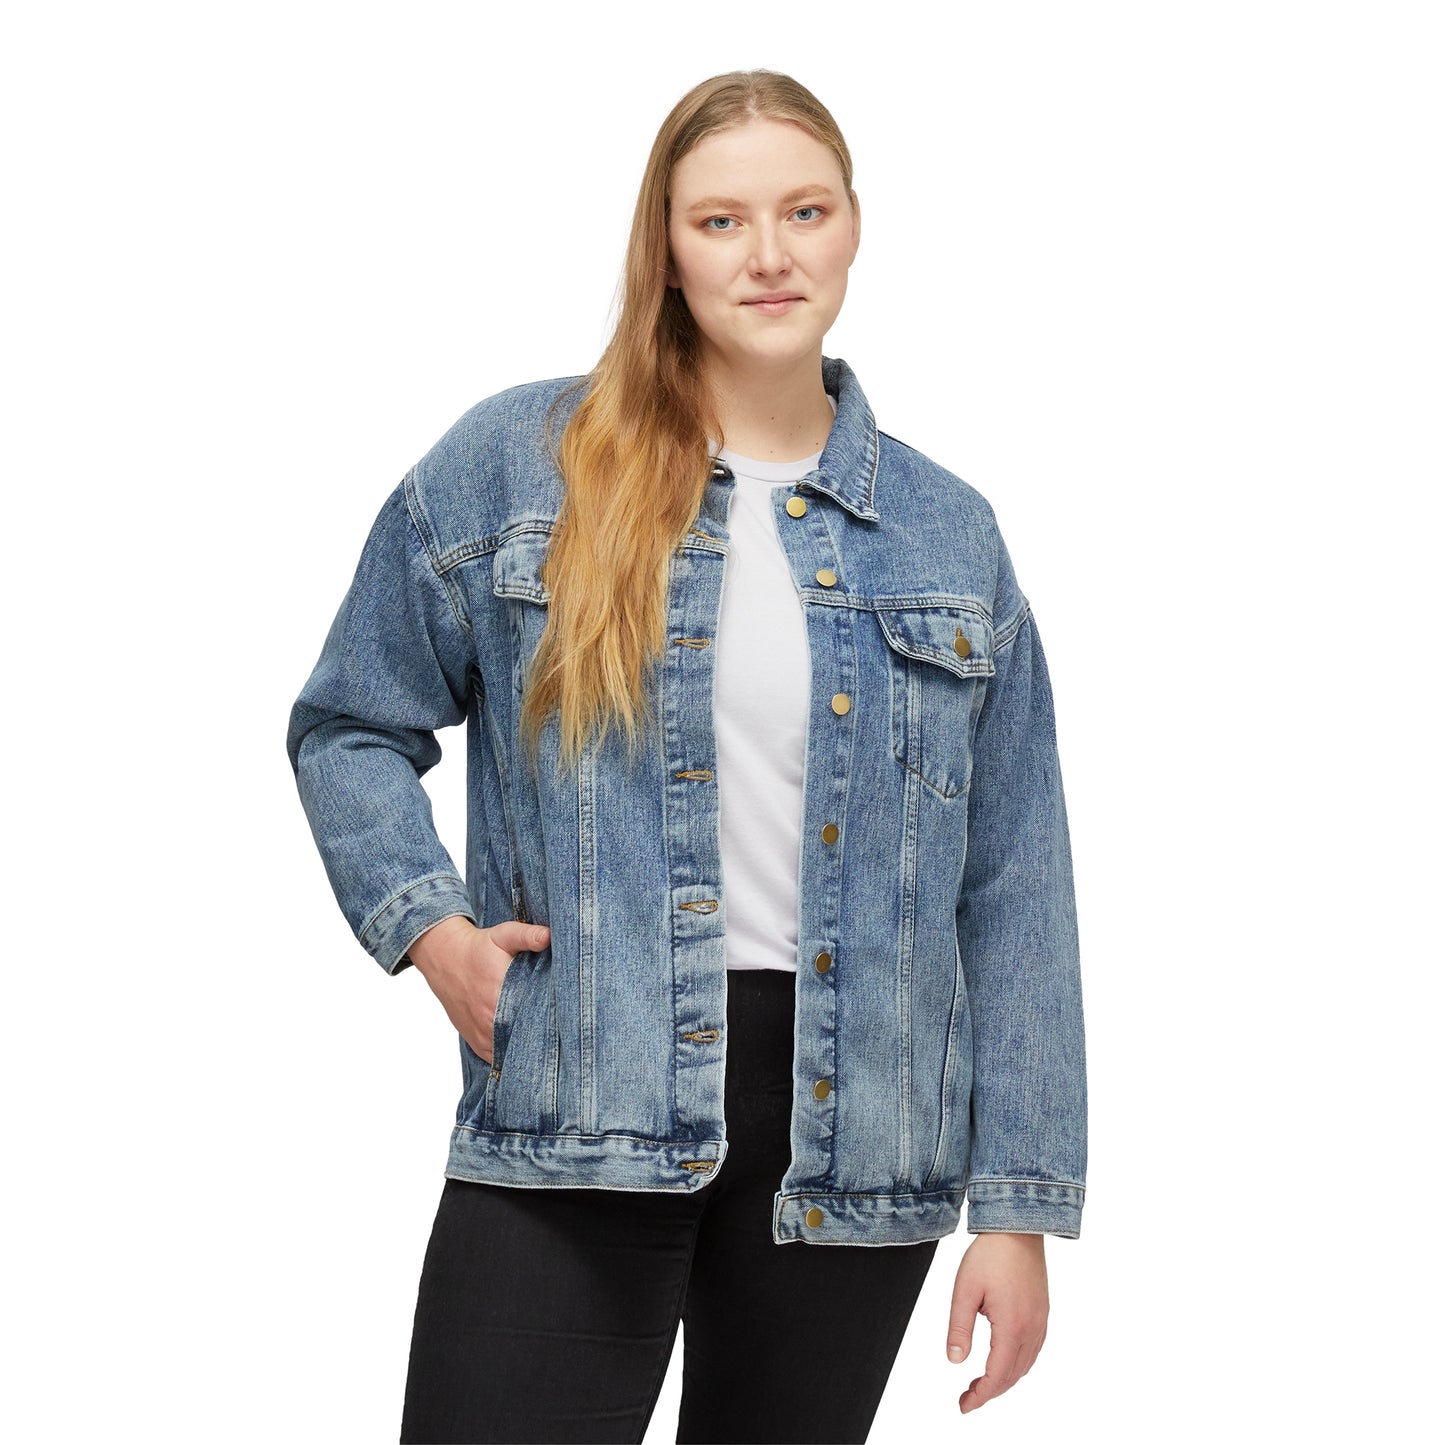 A woman posing in a casual outfit featuring a Printify Surfer-Girl Denim Jacket with button-front closure, white top, and black pants.